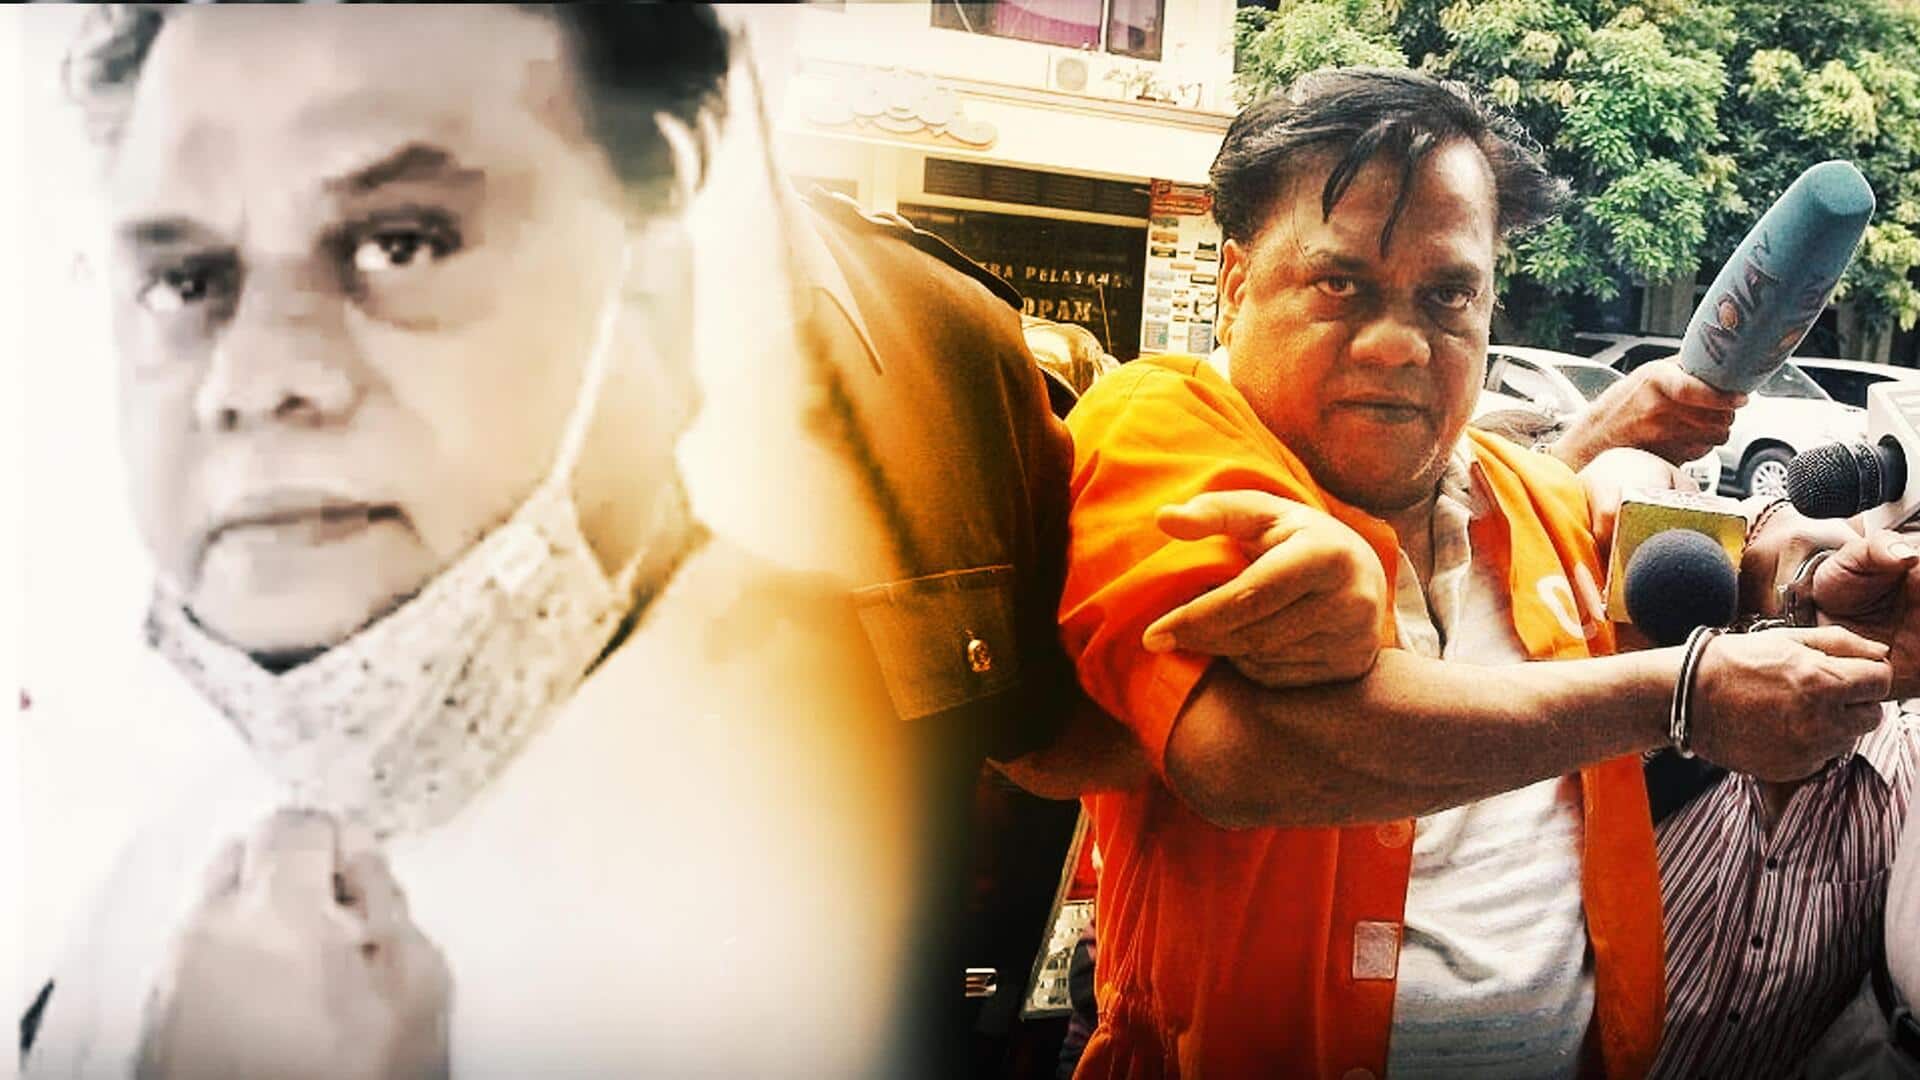 Chhota Rajan alive? Photo from Tihar surfaces after 9 years